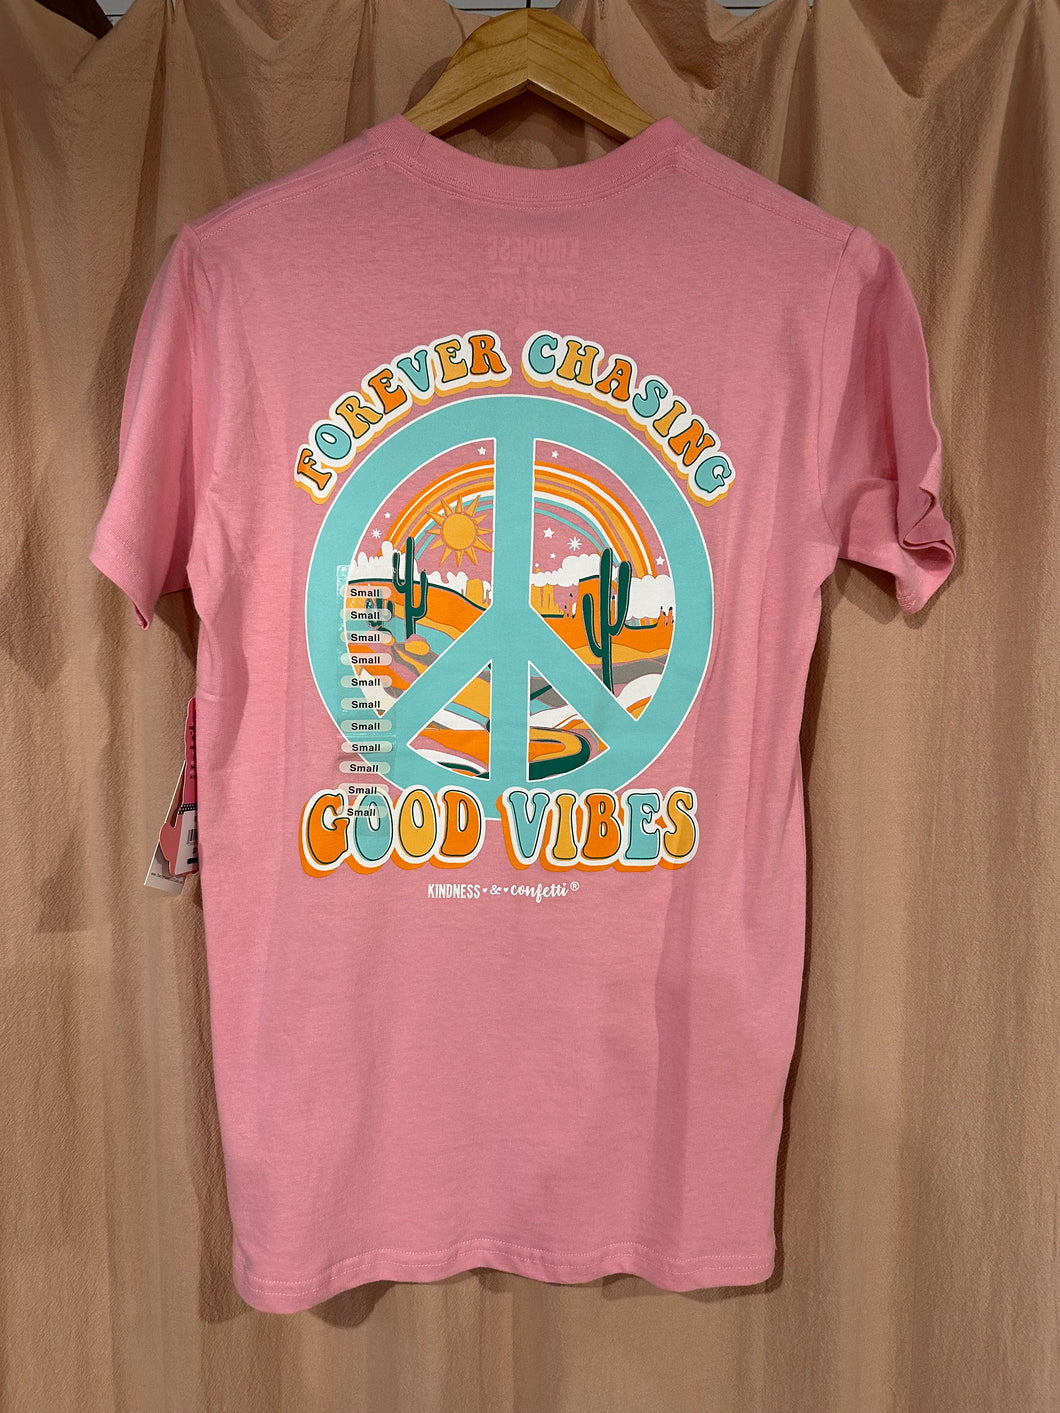 Forever Chasing Good Vibes Tee